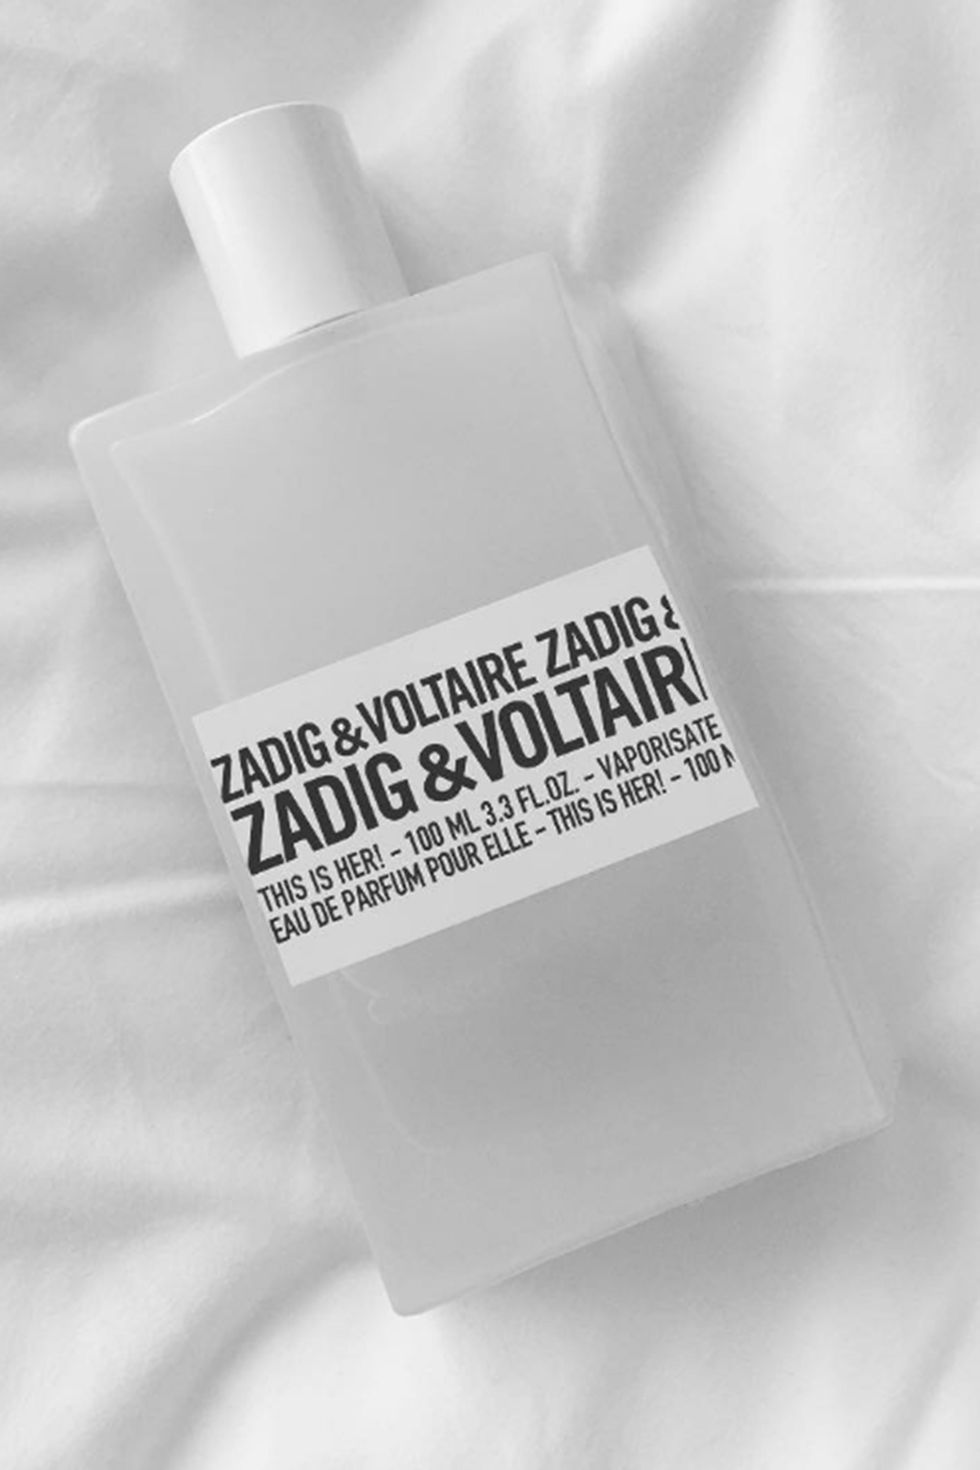 Zadig and voltaire fragrance